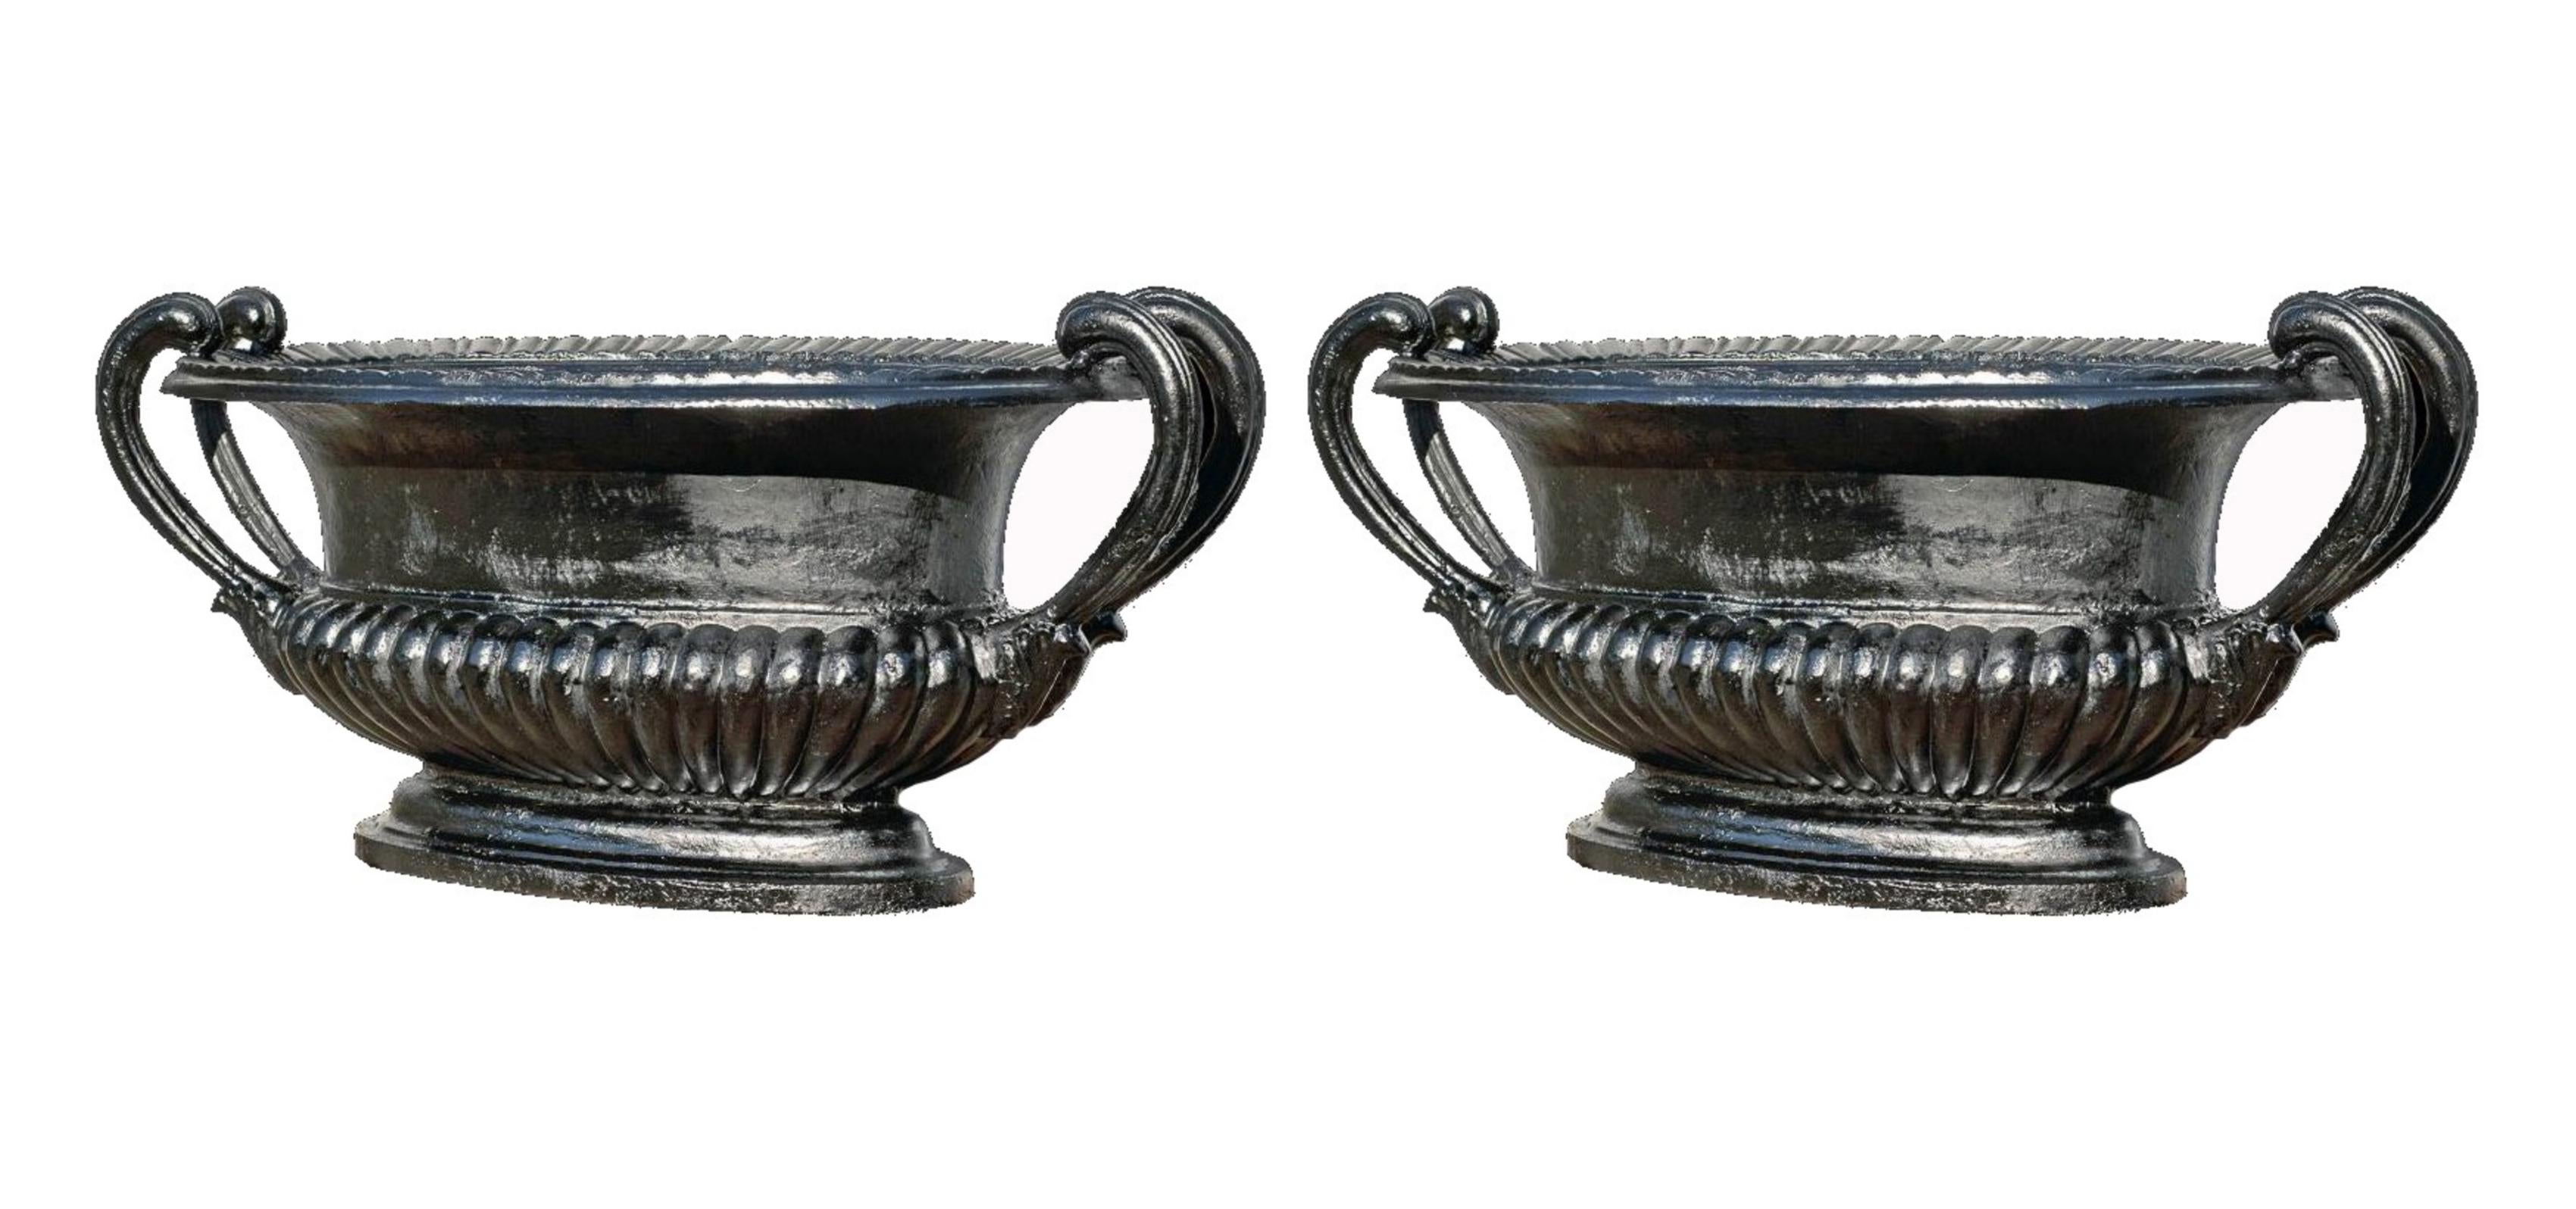 Renaissance Pair of Medici - Tuscany Pot with Handles Early 20th Century For Sale